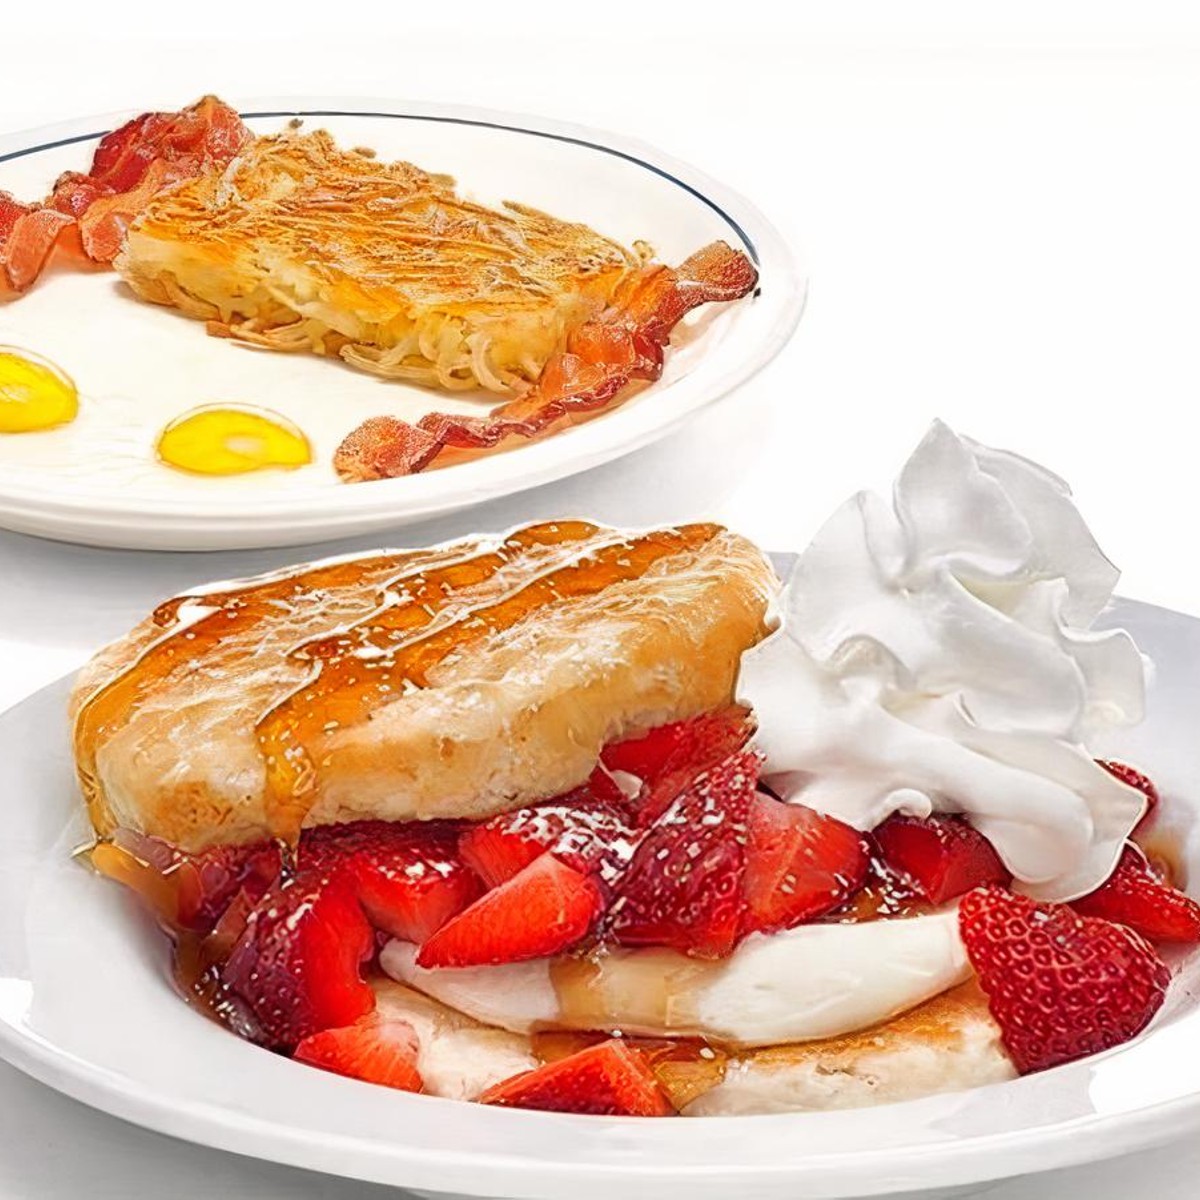 IHOP Biscuit menu celebrates sweet and savory flavors any time of day